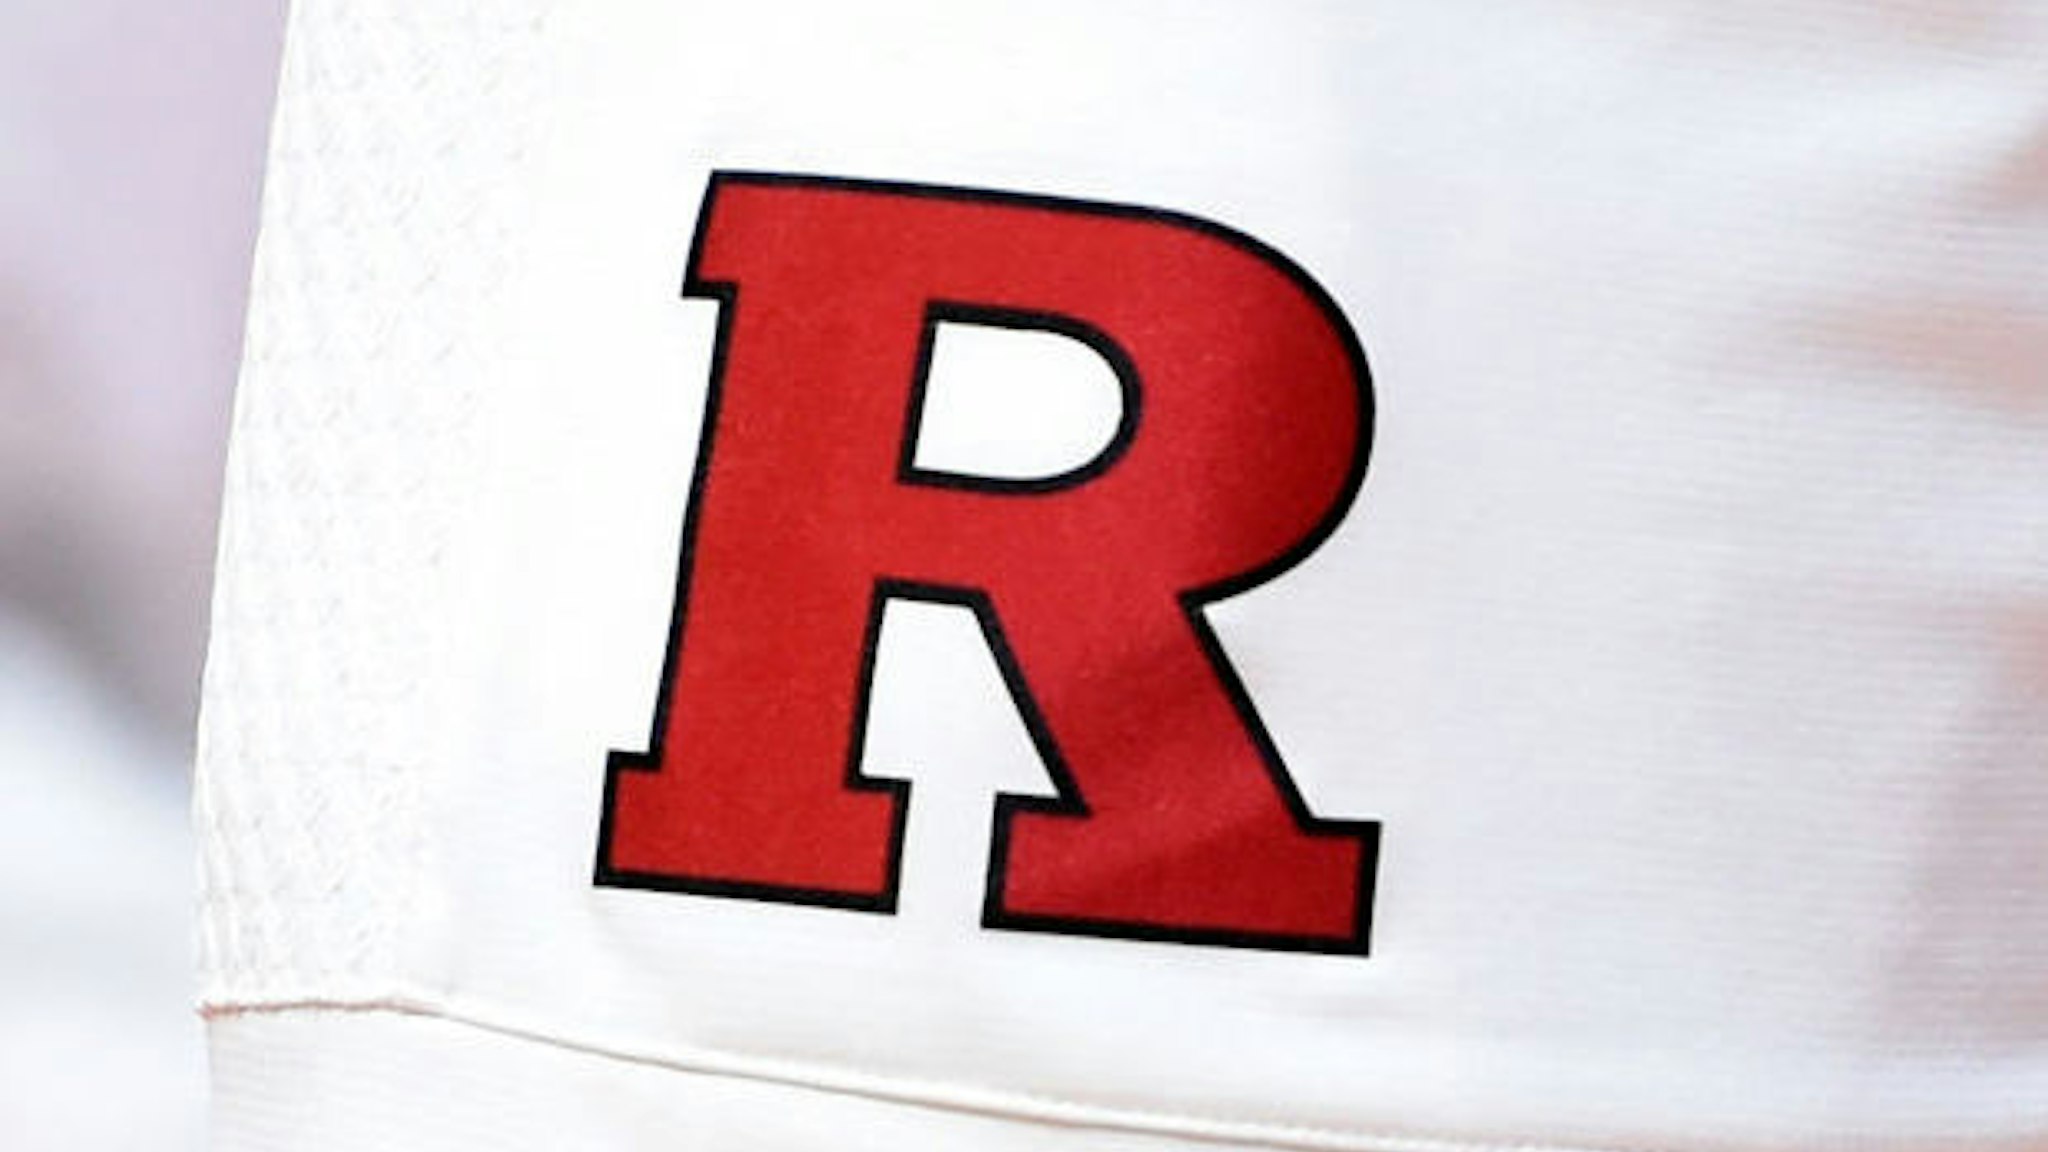 The Rutgers Scarlet Knights logo on their uniforms during the game against the Maryland Terrapins at Rutgers Athletic Center on March 3, 2020 in Piscataway, New Jersey. (Photo by G Fiume/Maryland Terrapins/Getty Images)